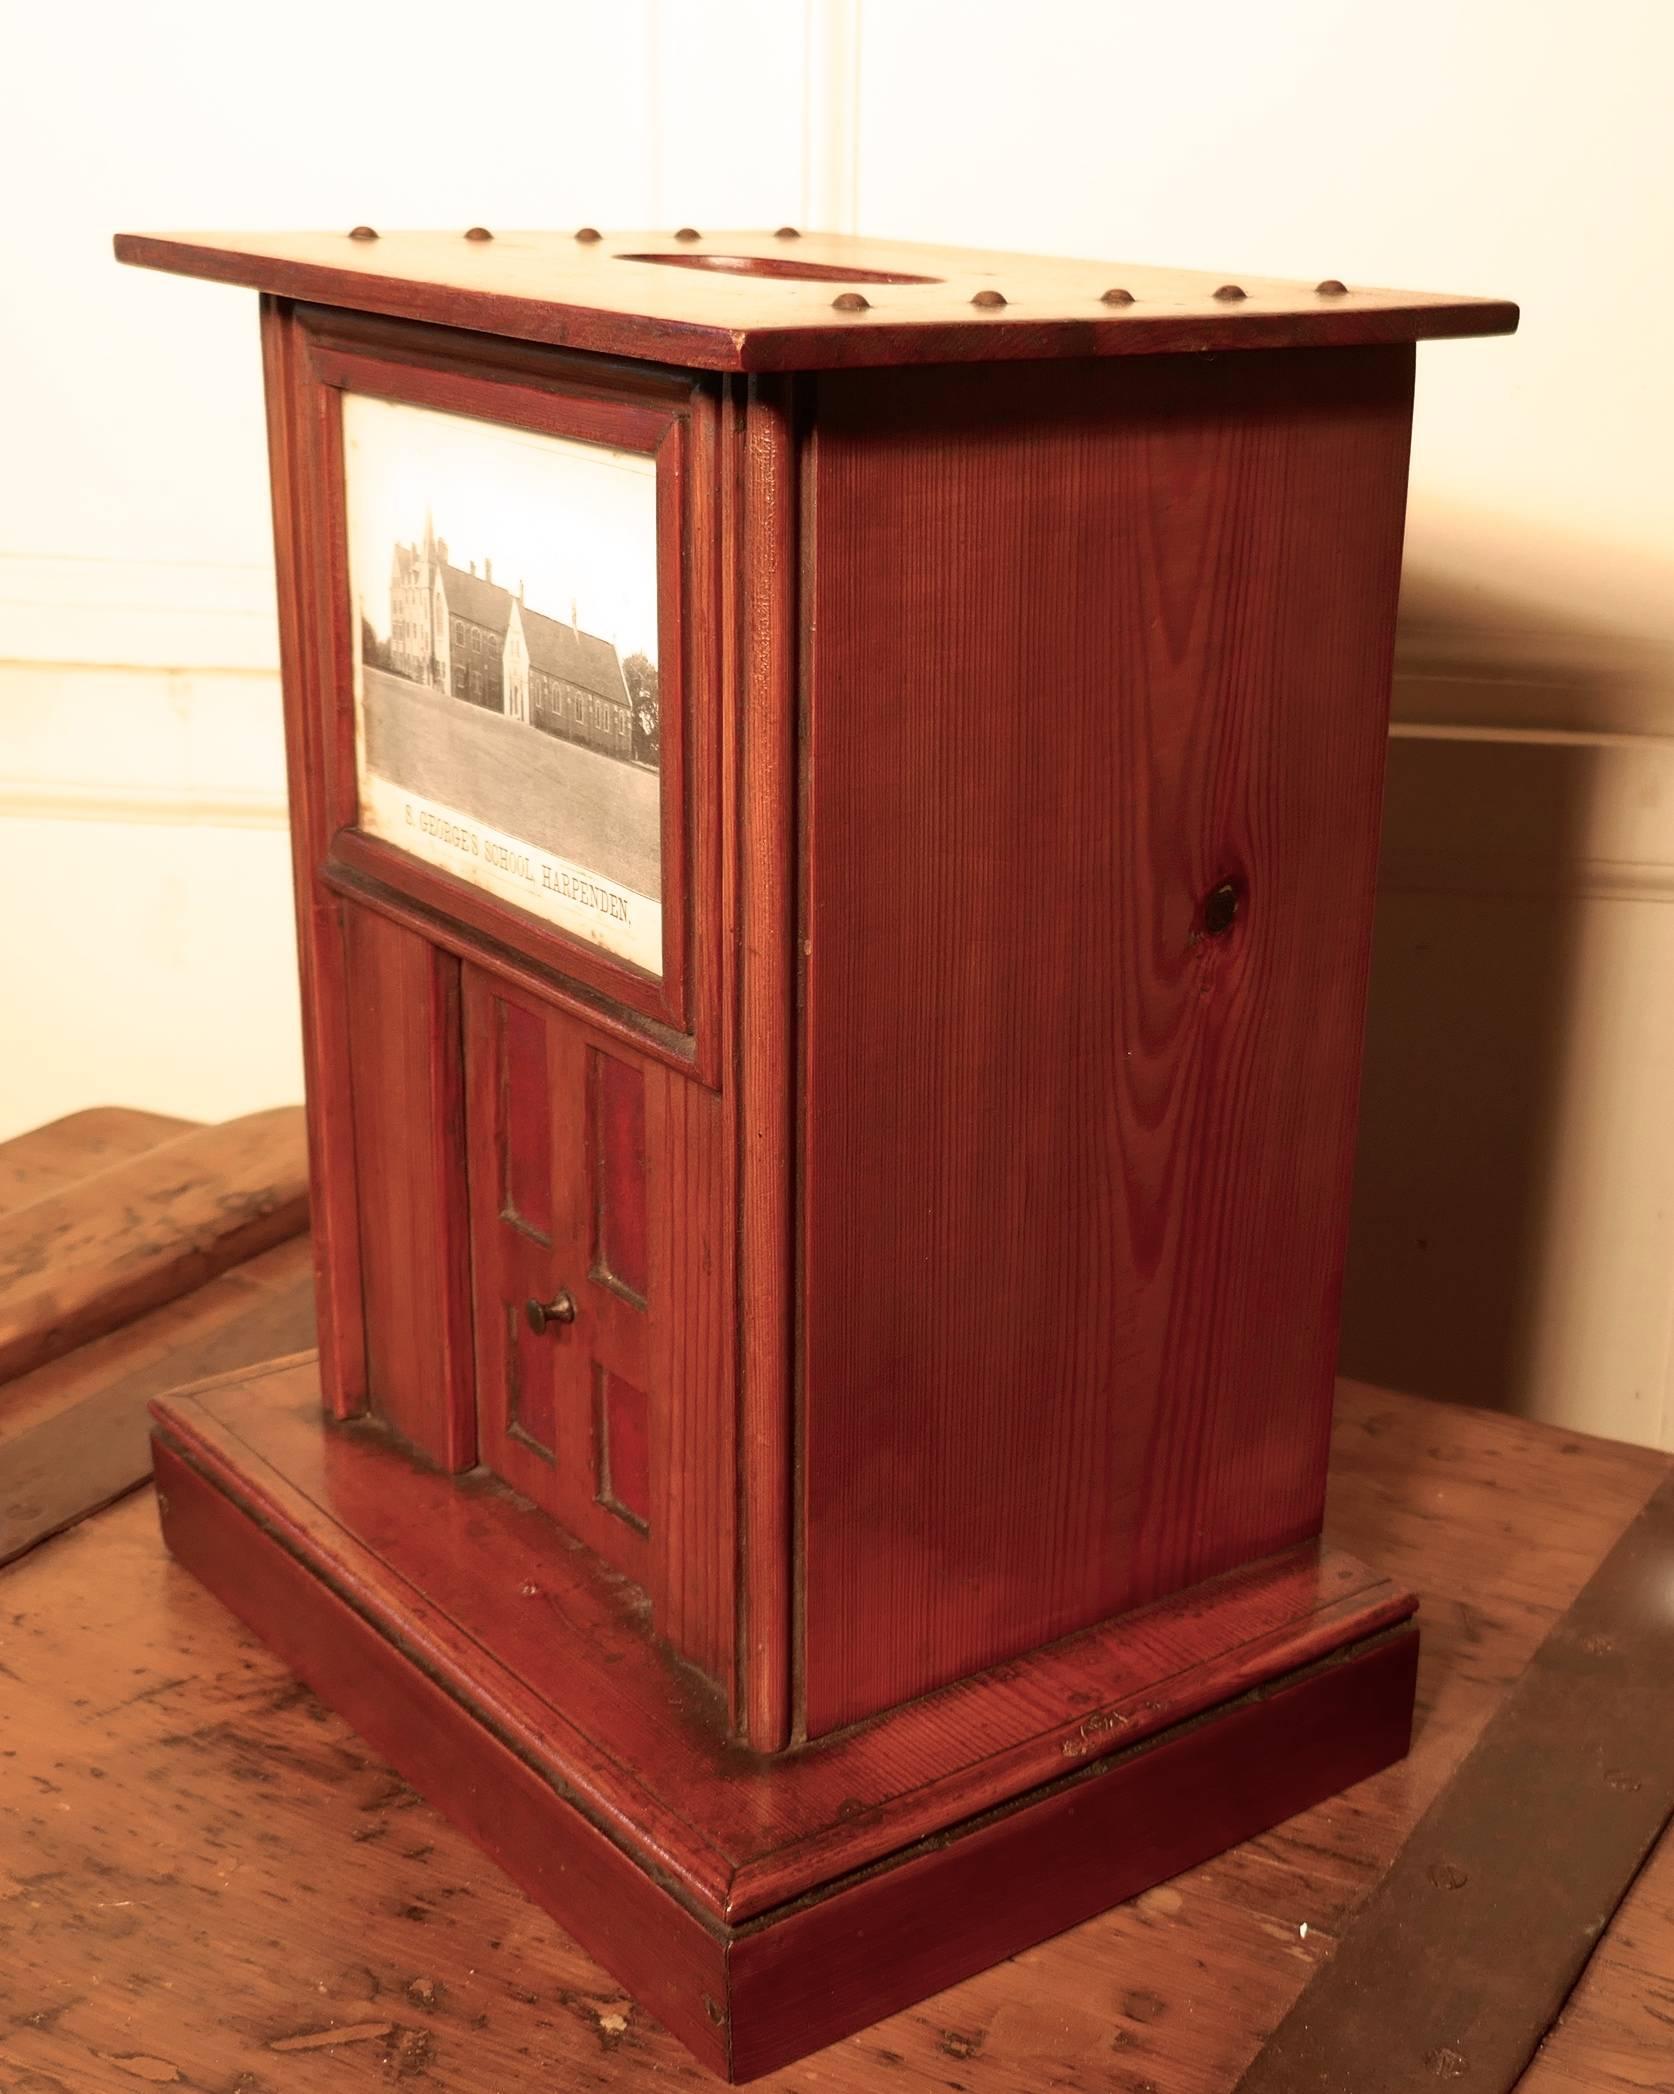 Post Box, 19th Century Victorian School House Letter Box In Good Condition For Sale In Chillerton, Isle of Wight